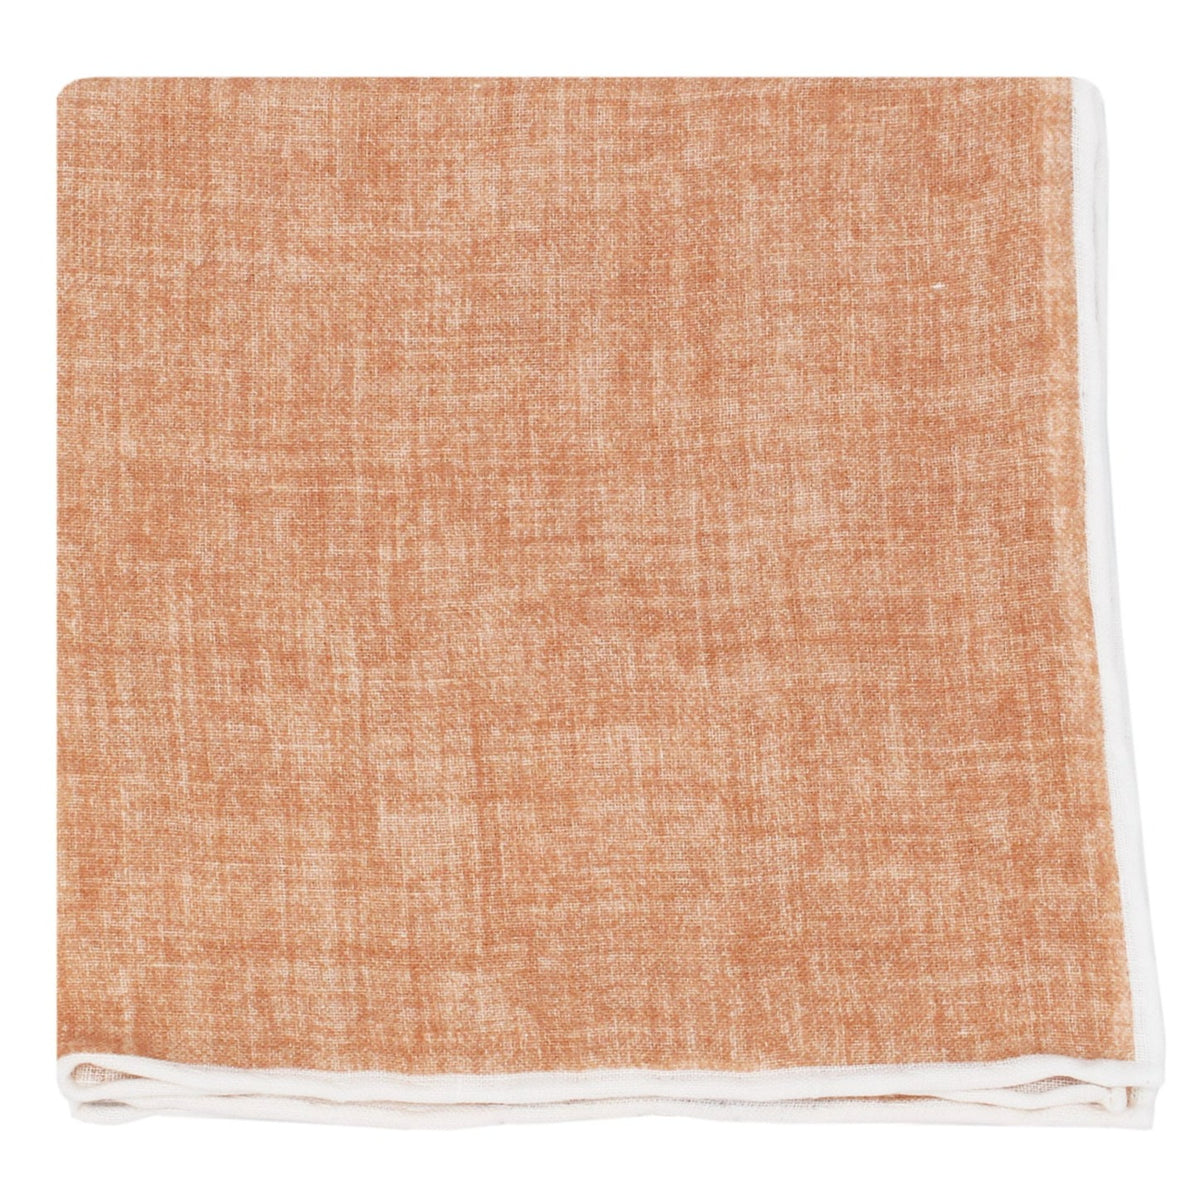 Linen pocket square with Peach Fuzz background and white border